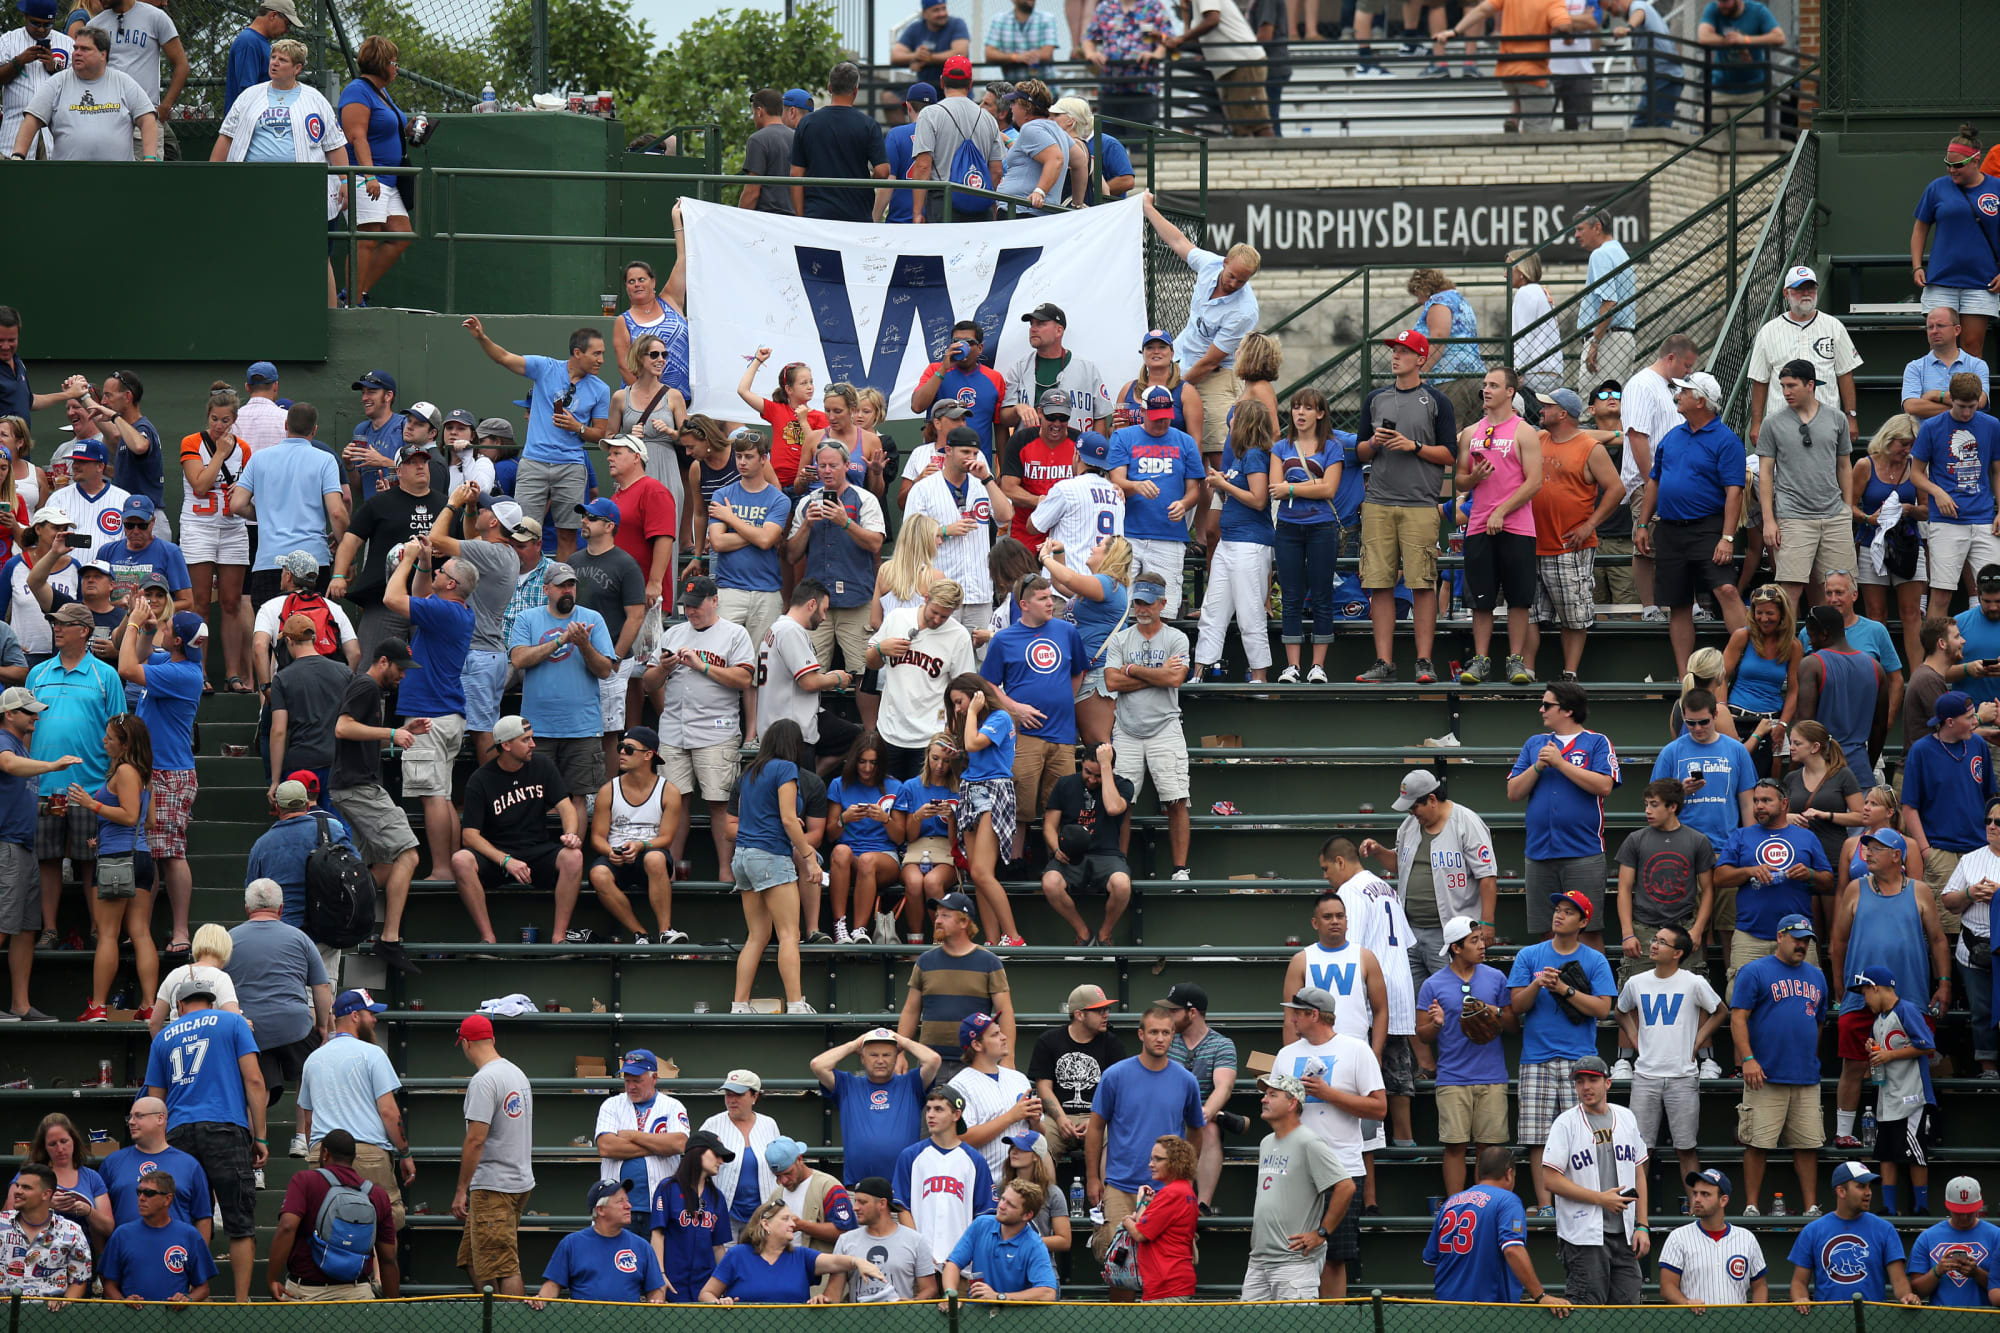 Cubs Opening Day Here's what to expect at Wrigley this weekend